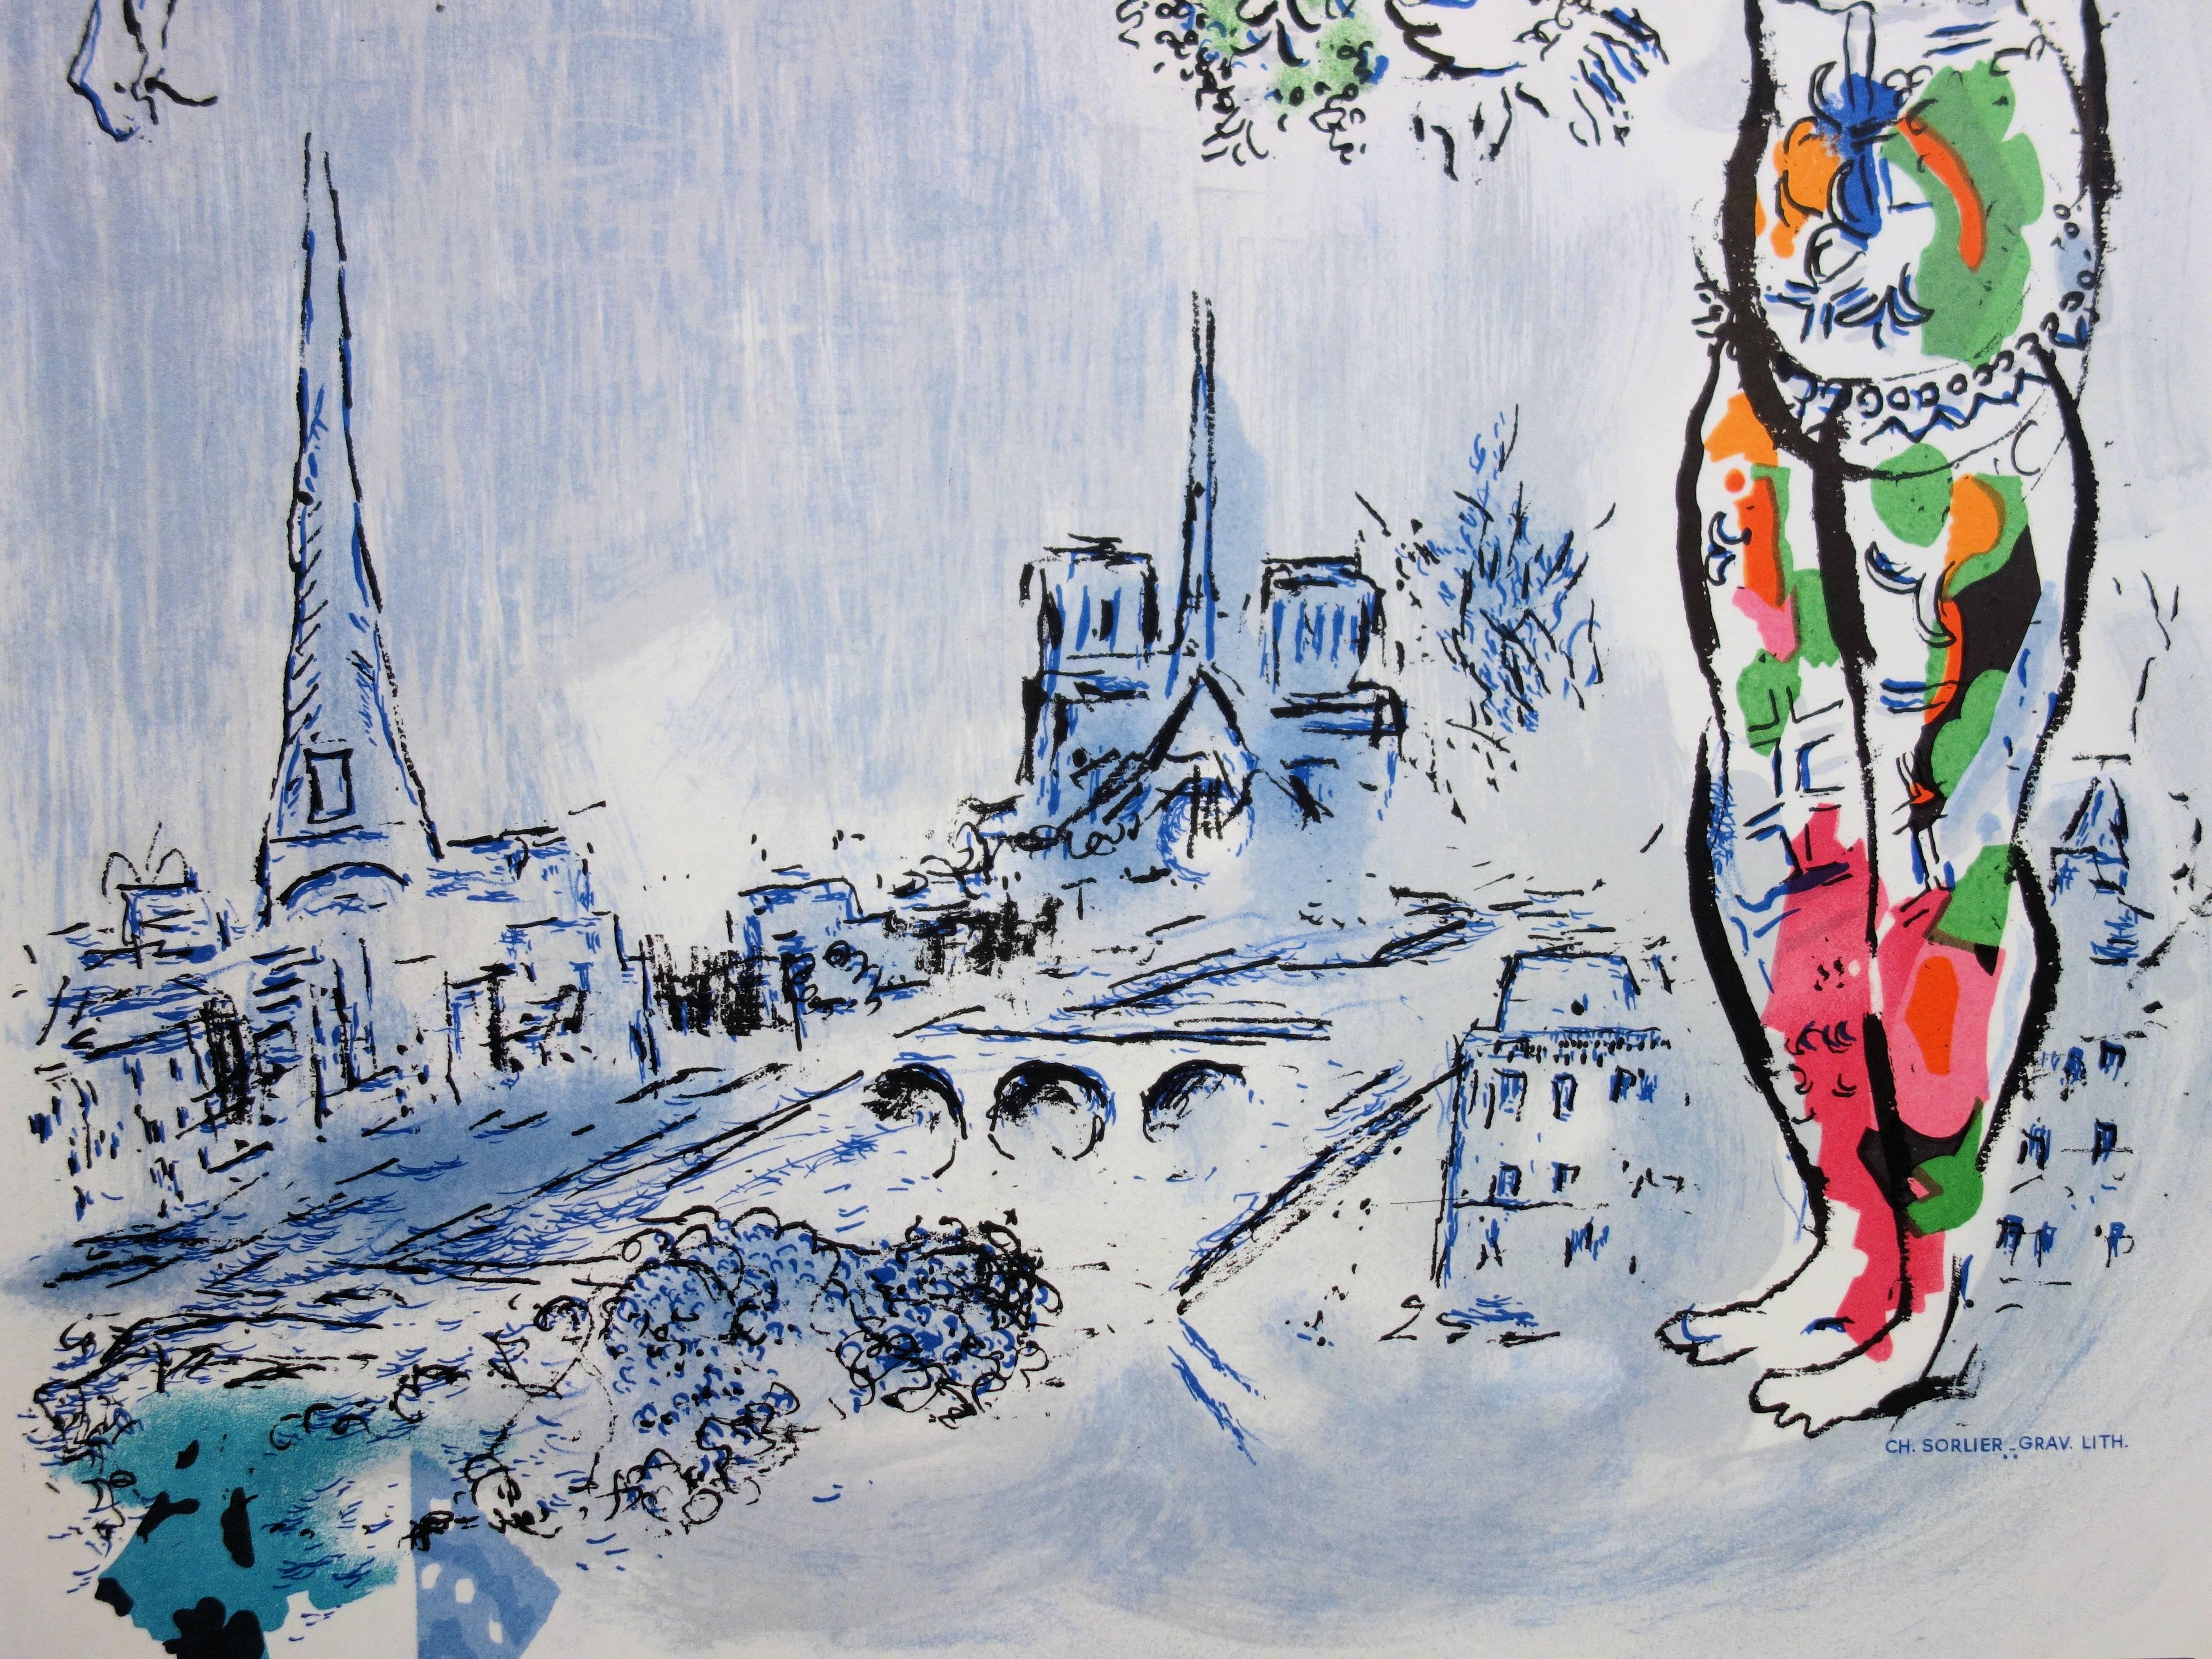 Magician of Paris - Lithograph poster - Mourlot 1970 - Modern Print by (after) Marc Chagall